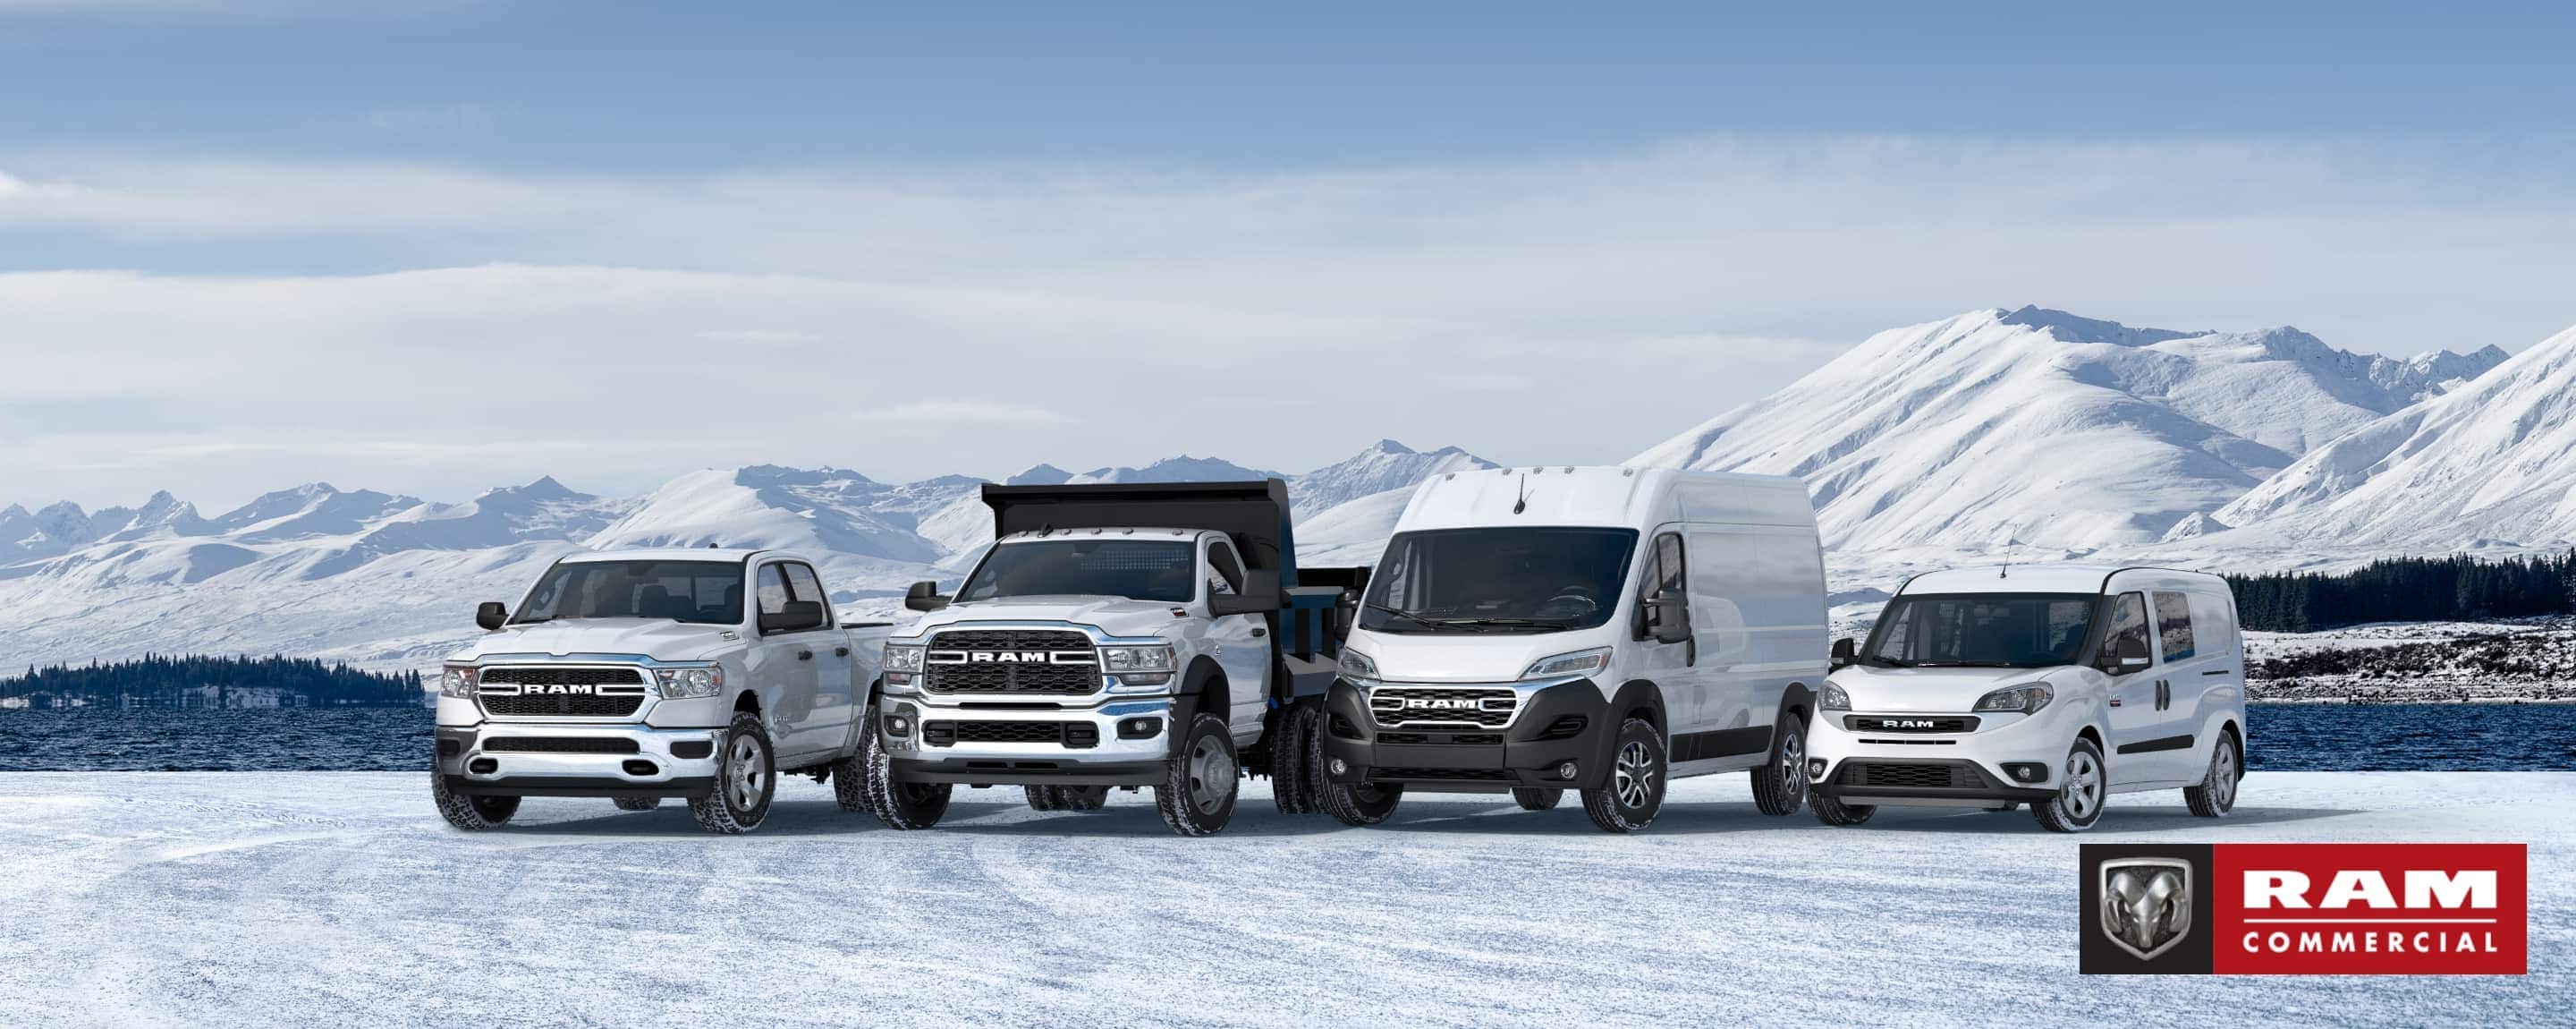  A winter scene consisting of a lineup in white of Ram Trucks and Vans parked on a snow-covered clearing with mountains in the background. From left to right: a 2022 Ram 1500 Tradesman 4x4 Crew Cab, a 2022 Ram 5500 Tradesman 4x4 Regular Cab, a 2023 Ram ProMaster High Roof Cargo Van and a 2022 Ram ProMaster City Wagon. Ram Commercial.